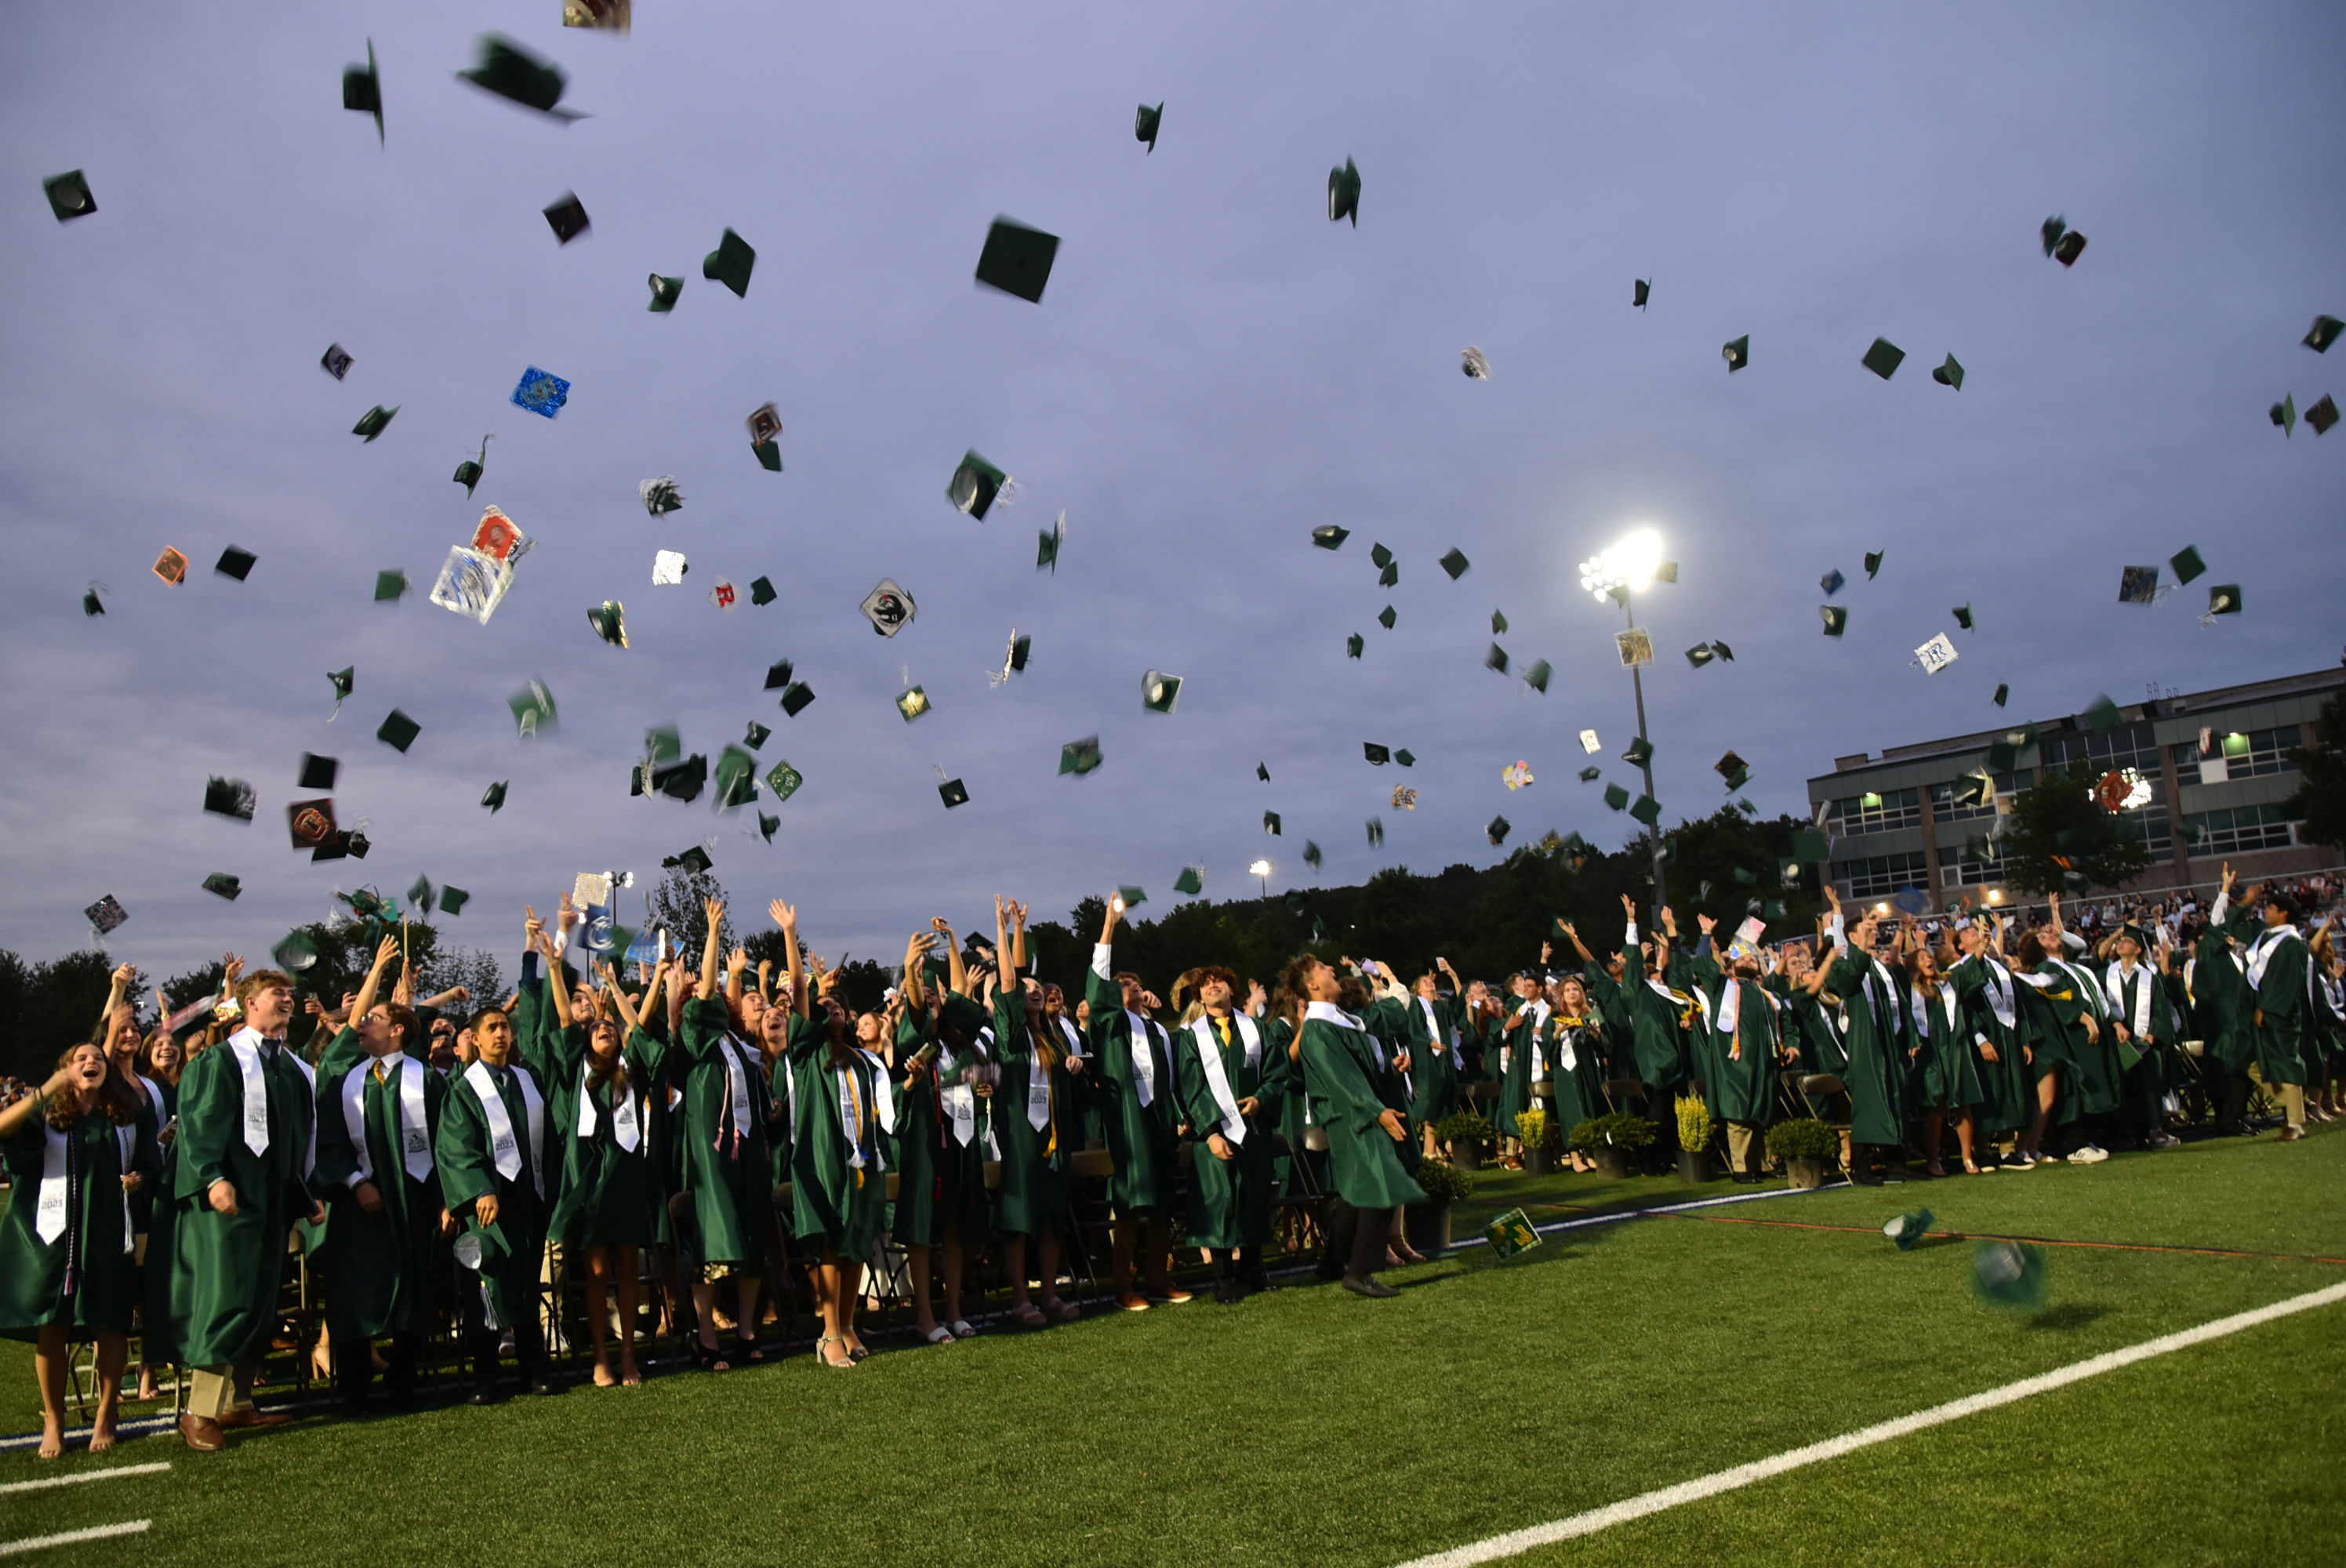 Graduates toss their caps in the air. Congratulations! The #MTHS Class of 2023! Over 275 seniors graduated on June 22. #MustangPride! The ceremony was held on the field in the Mustang Stadium. The event was also broadcast on the Montville Township Public Schools YouTube Channel. WATCH NOW:  montville.net/mthsgraduation